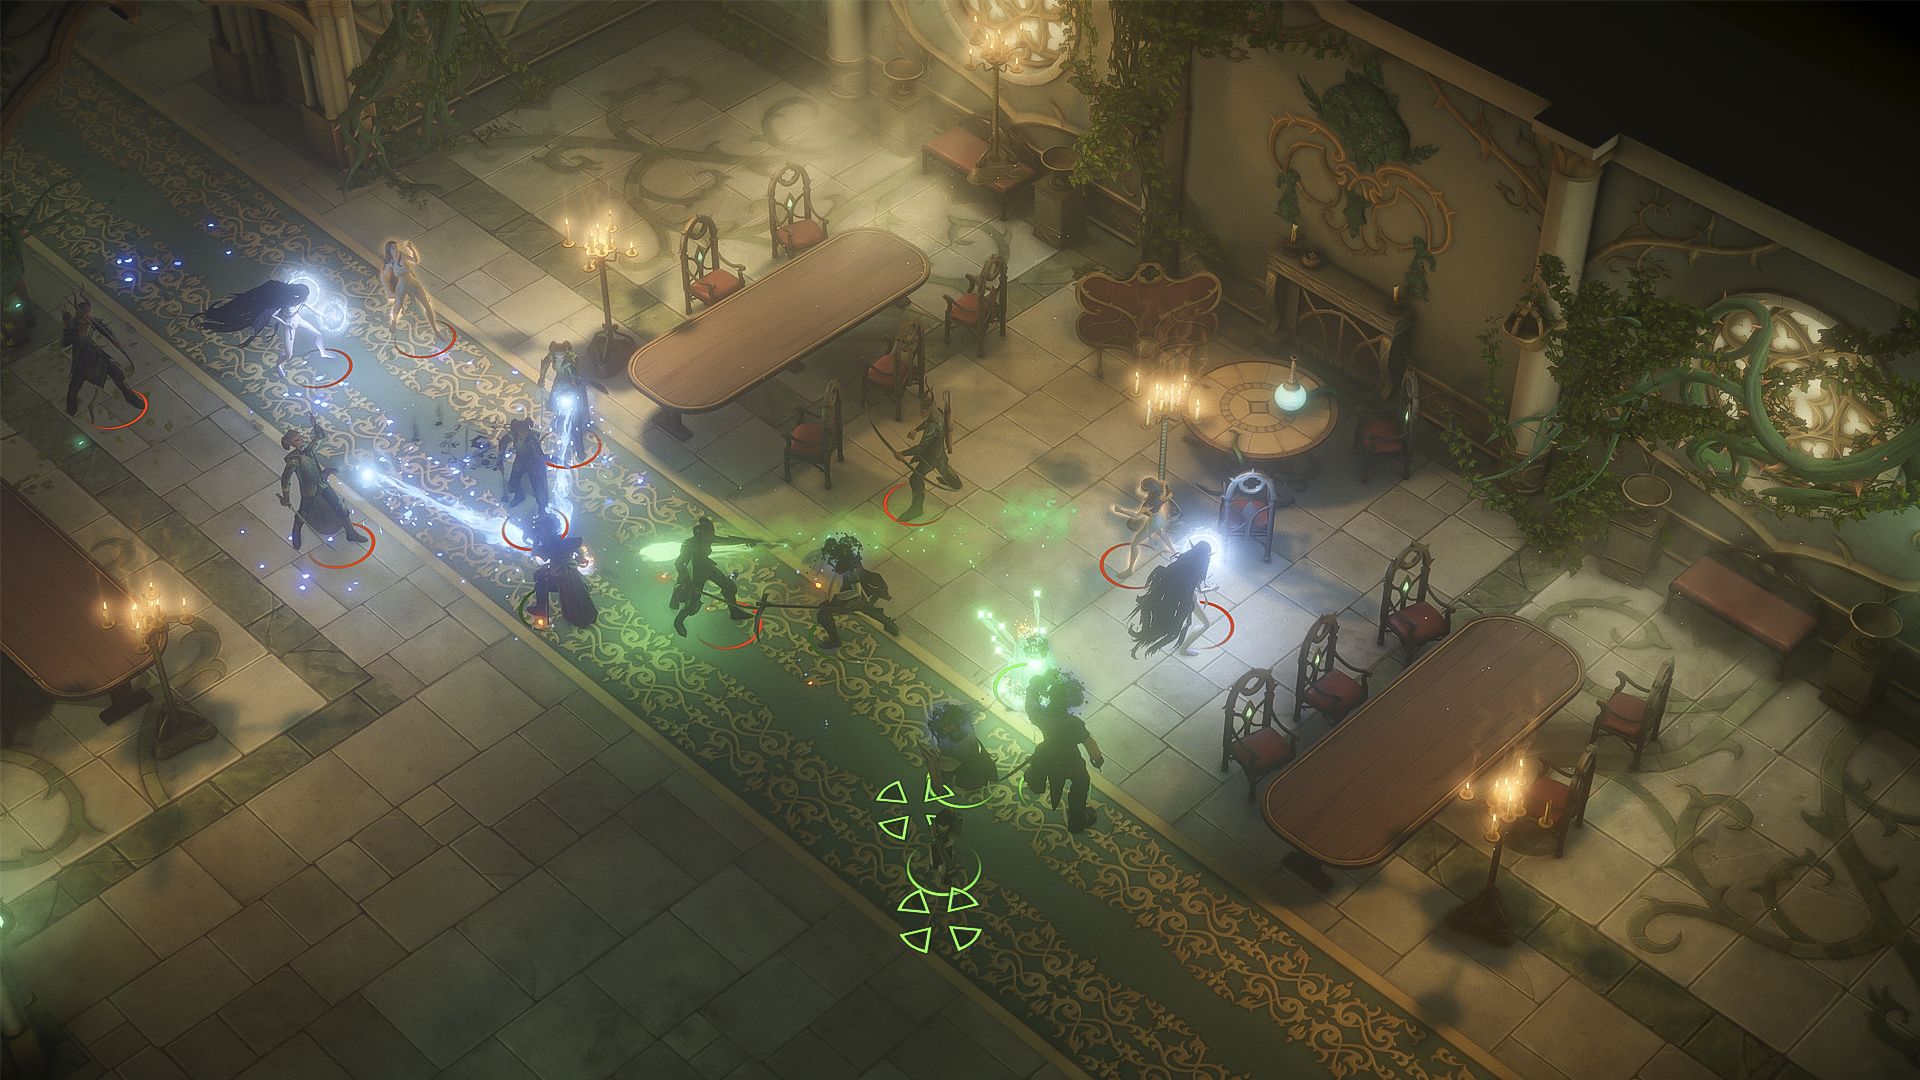 Pathfinder: Kingmaker is getting a free enhanced edition, and you can play the beta now